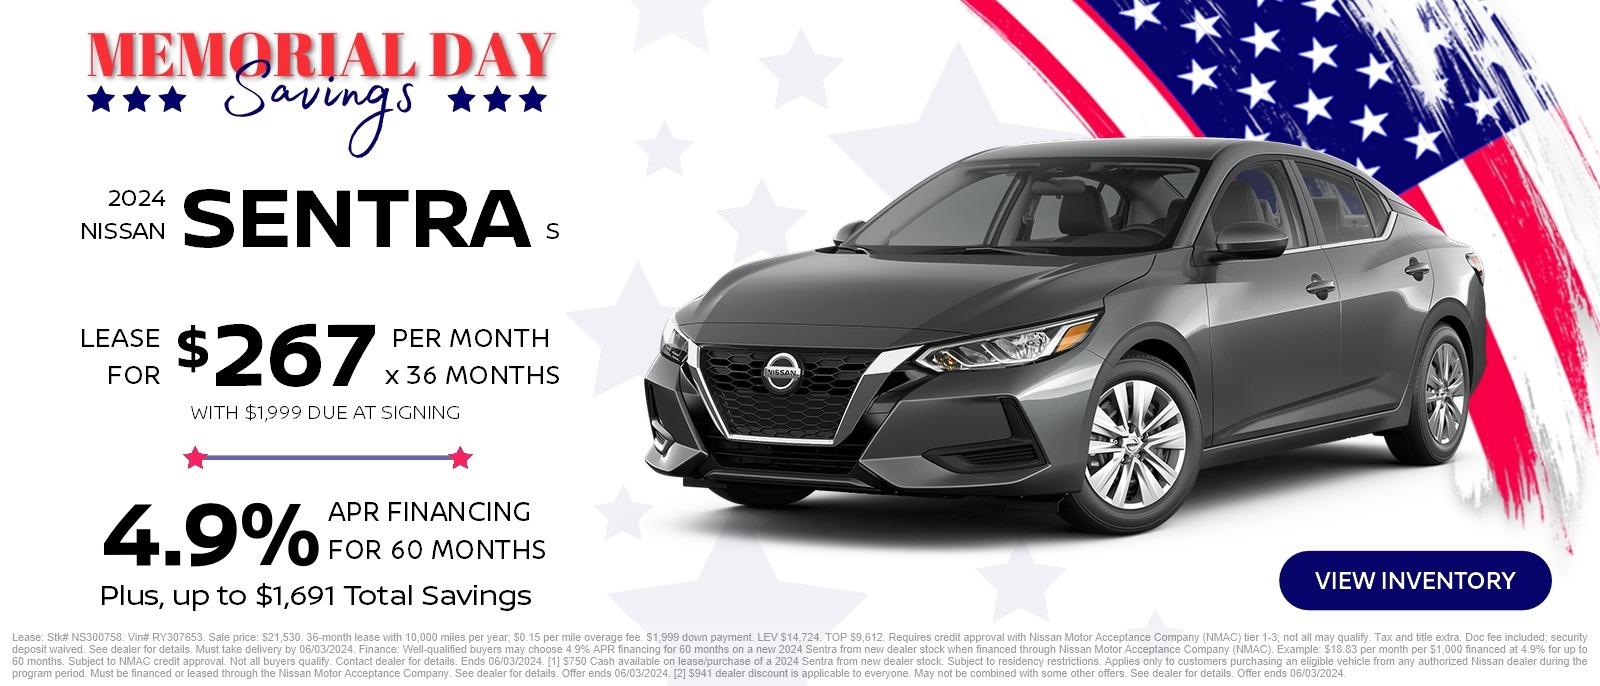 Memorial Day Savings
2024 Nissan Sentra S
Lease for $267 per month x 36 months with $1,999 due at signing
or
4.9% APR Financing for 60 months
plus, up to $1,691 total savings